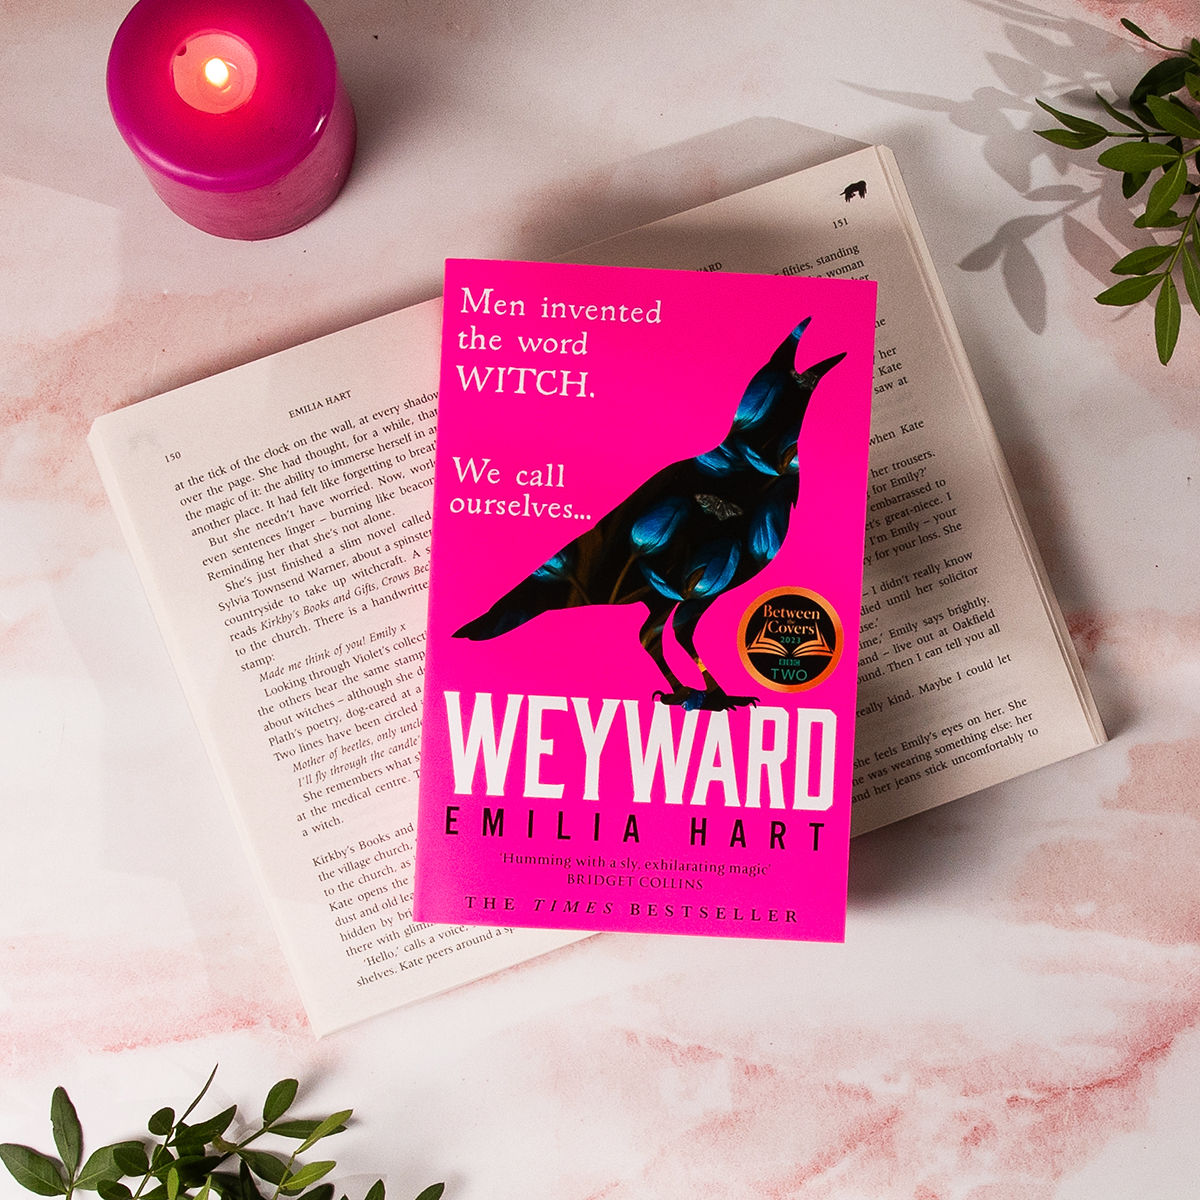 'A fabulous debut’ @PrimaMag ‘Alive, vivid and gripping’ @abigailsdean ‘Humming with a sly, exhilarating magic’ @Br1dgetCollins Have you joined the #Weyward movement and picked up a copy of @EmiliaHartBooks' unforgettable debut yet? Start reading now: lnk.to/WeywardPB